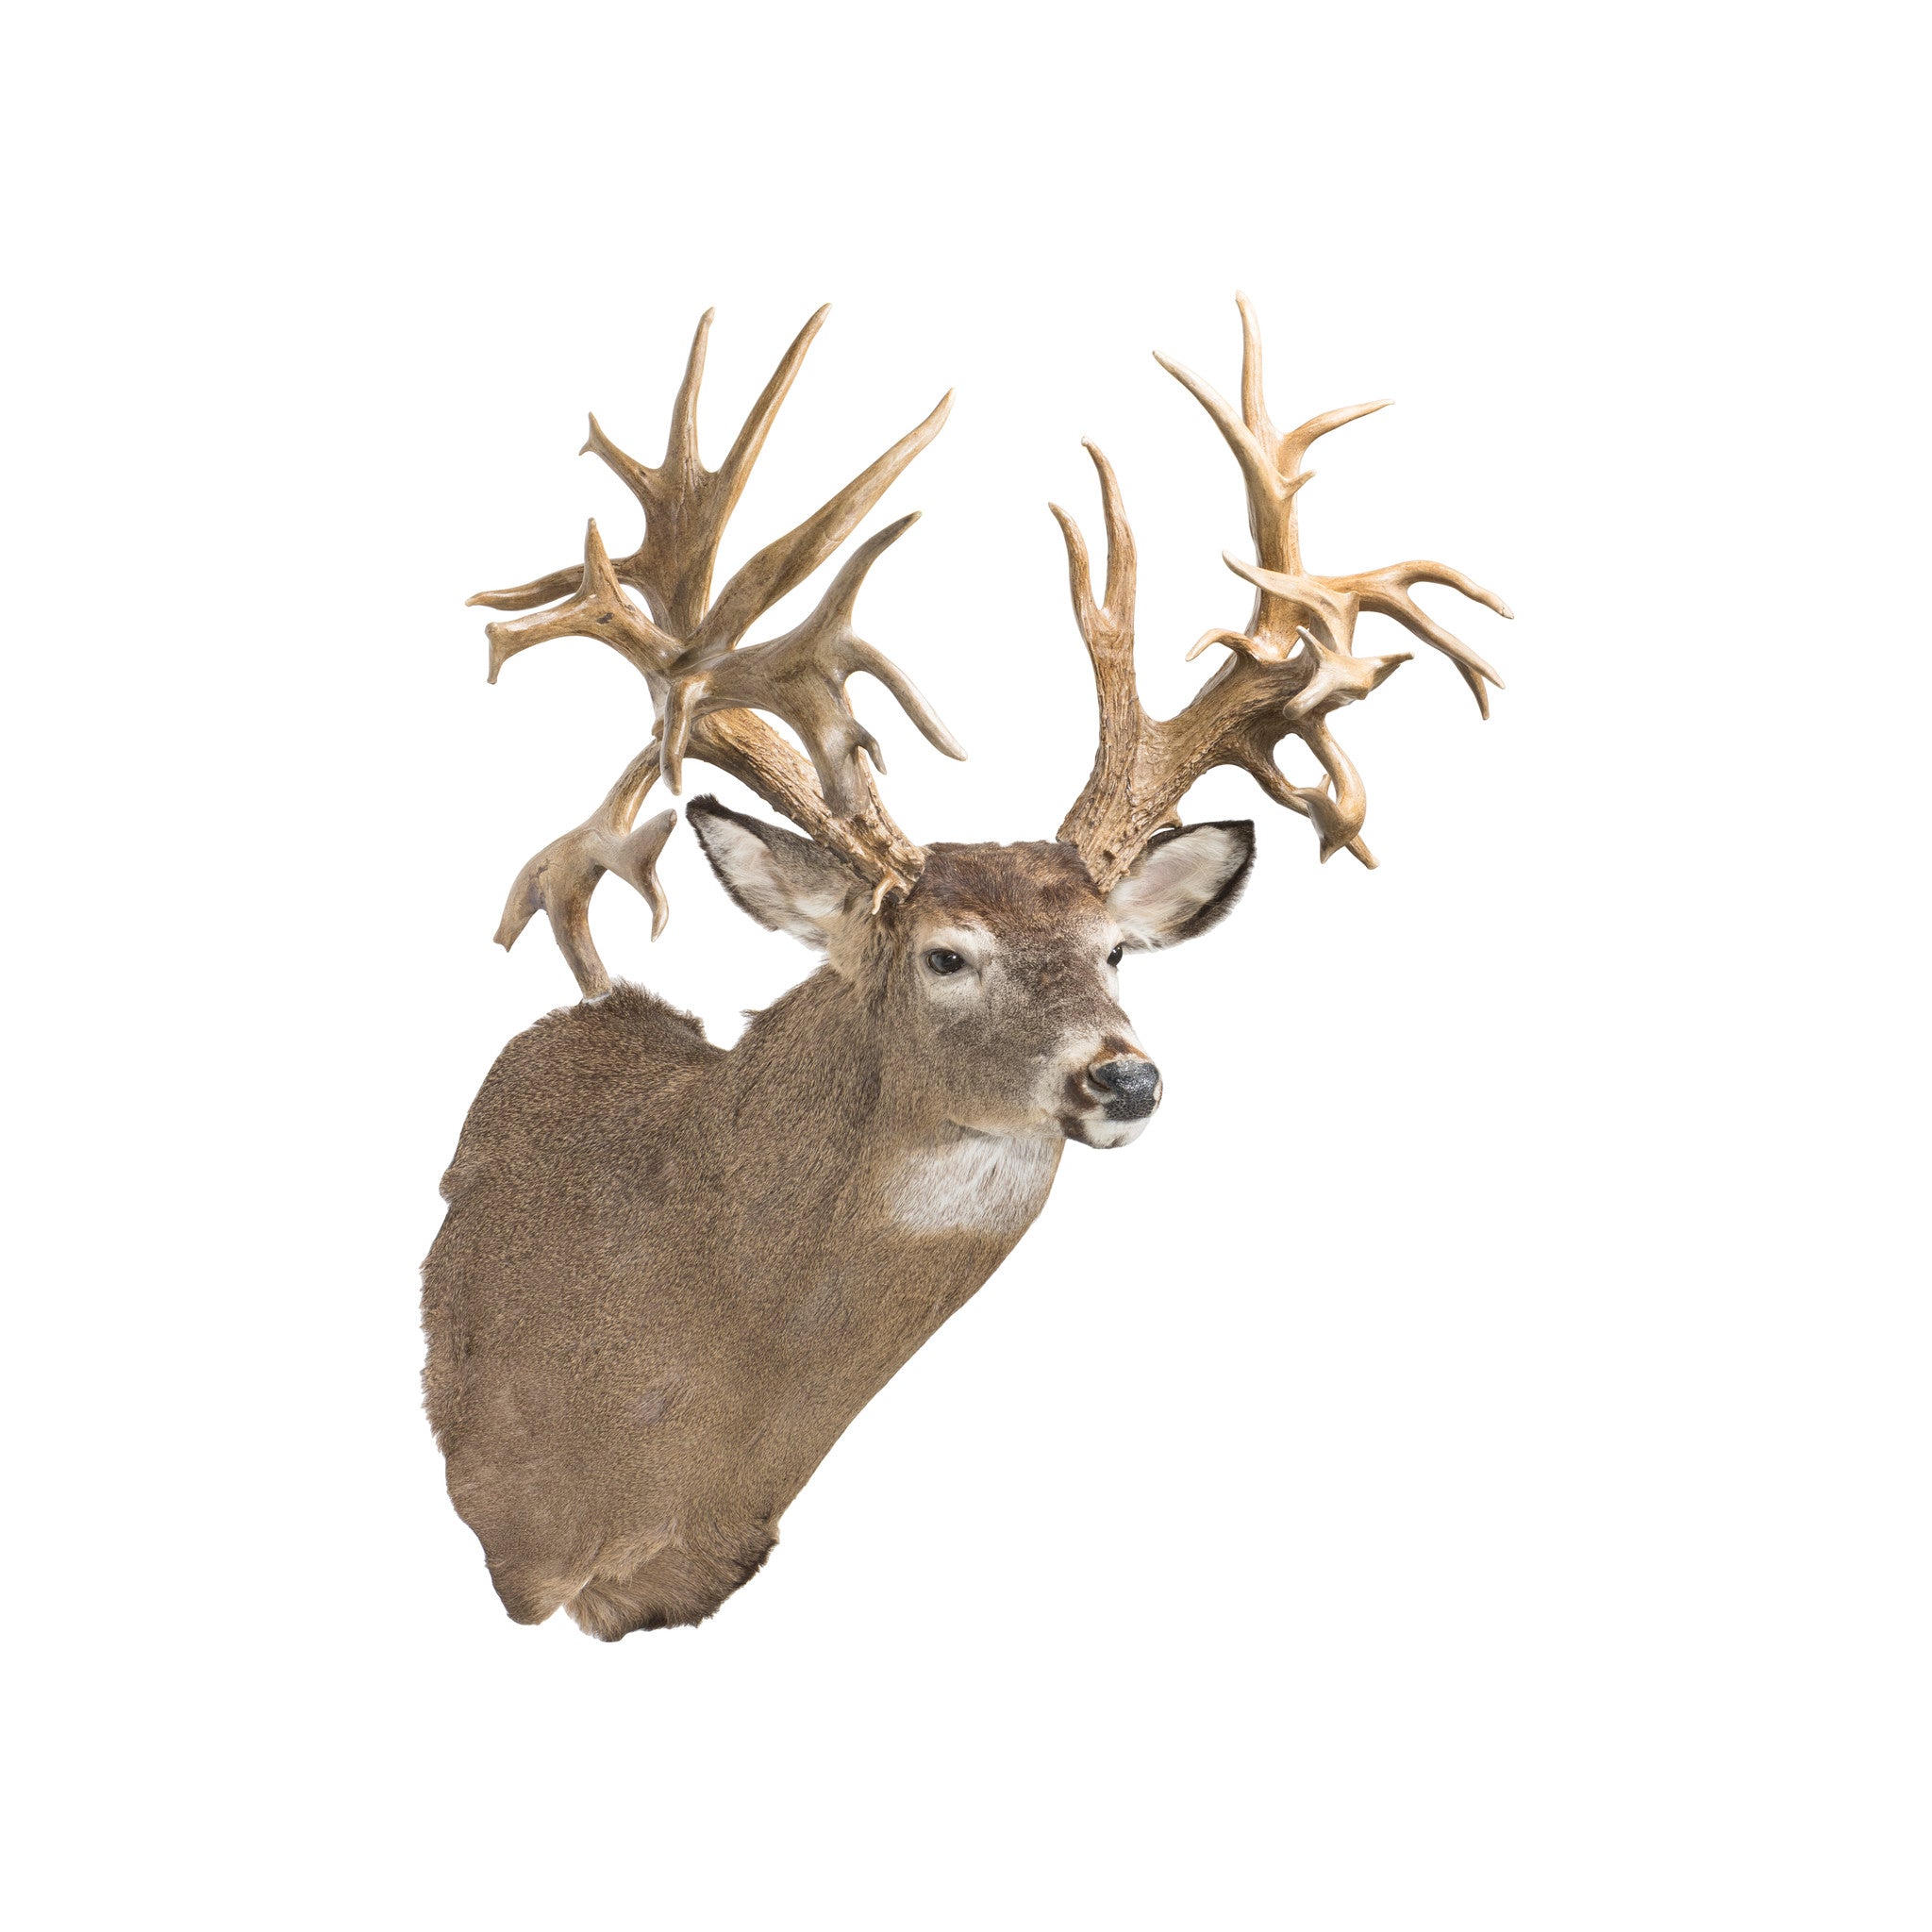 45 Point Hunting Preserve Non-Typical Whitetail Deer, Furnishings, Taxidermy, Deer